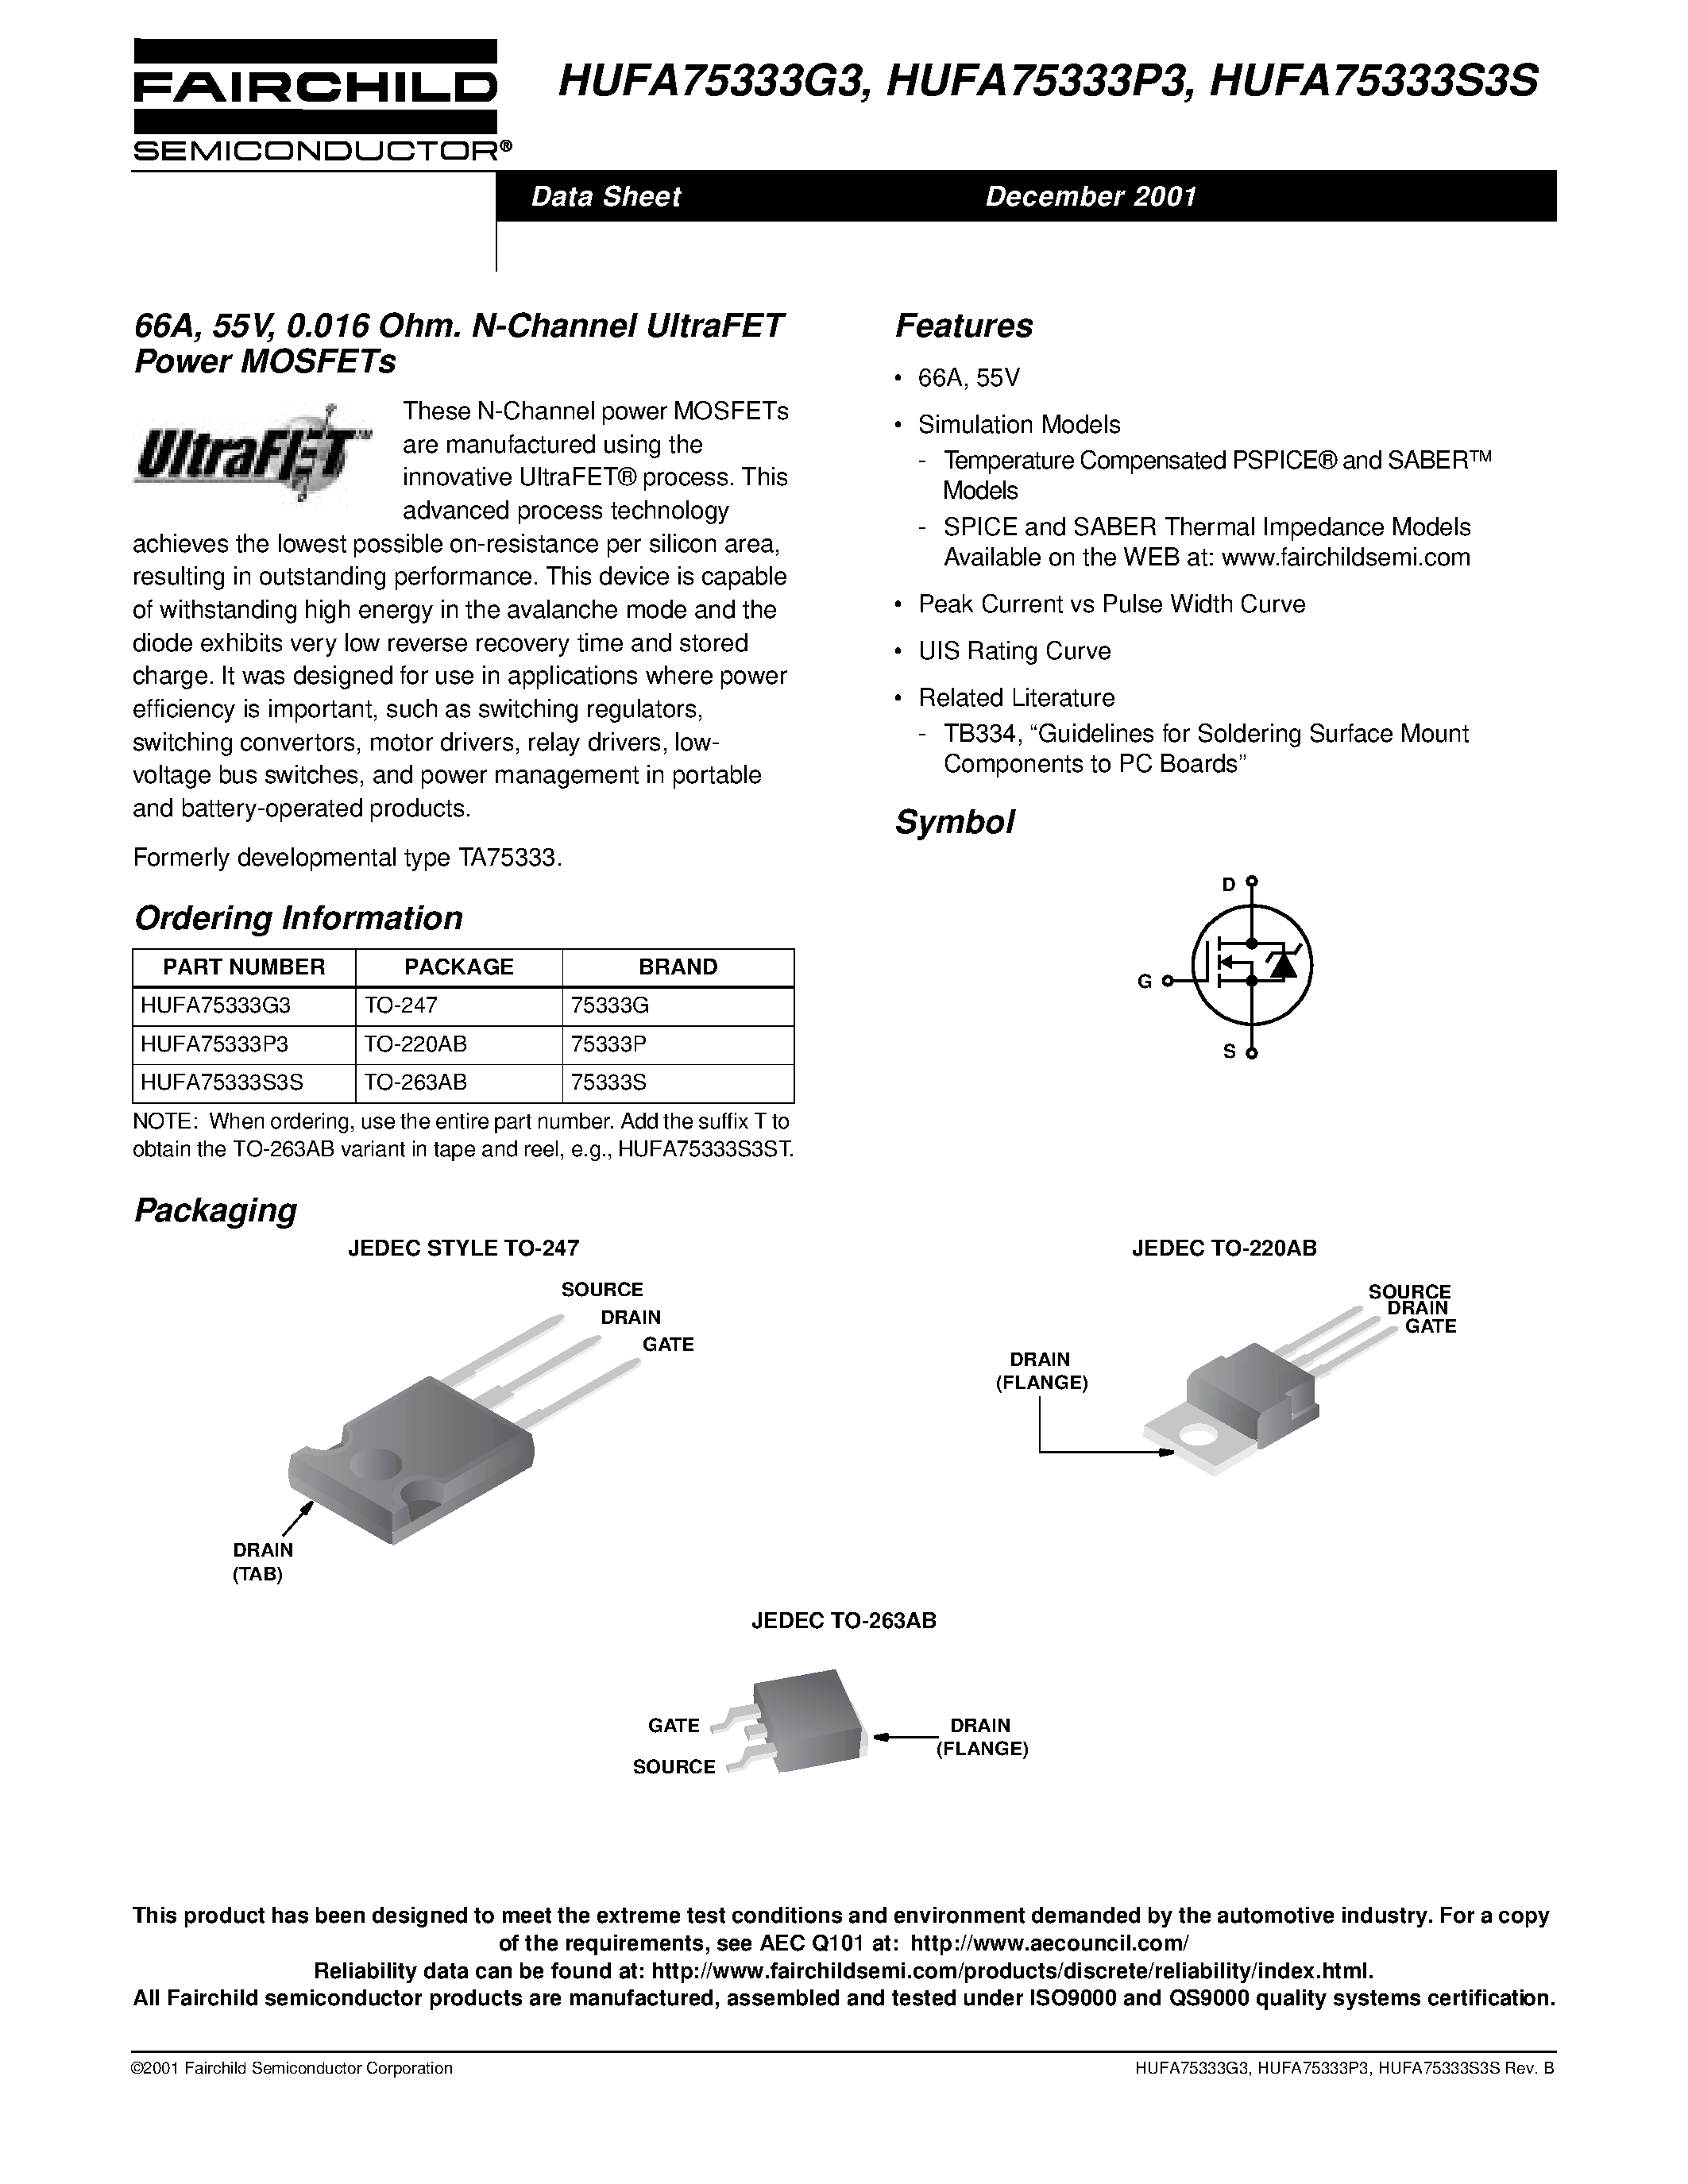 Datasheet HUFA75329S3S - 49A/ 55V/ 0.024 Ohm/ N-Channel UltraFET Power MOSFETs page 1